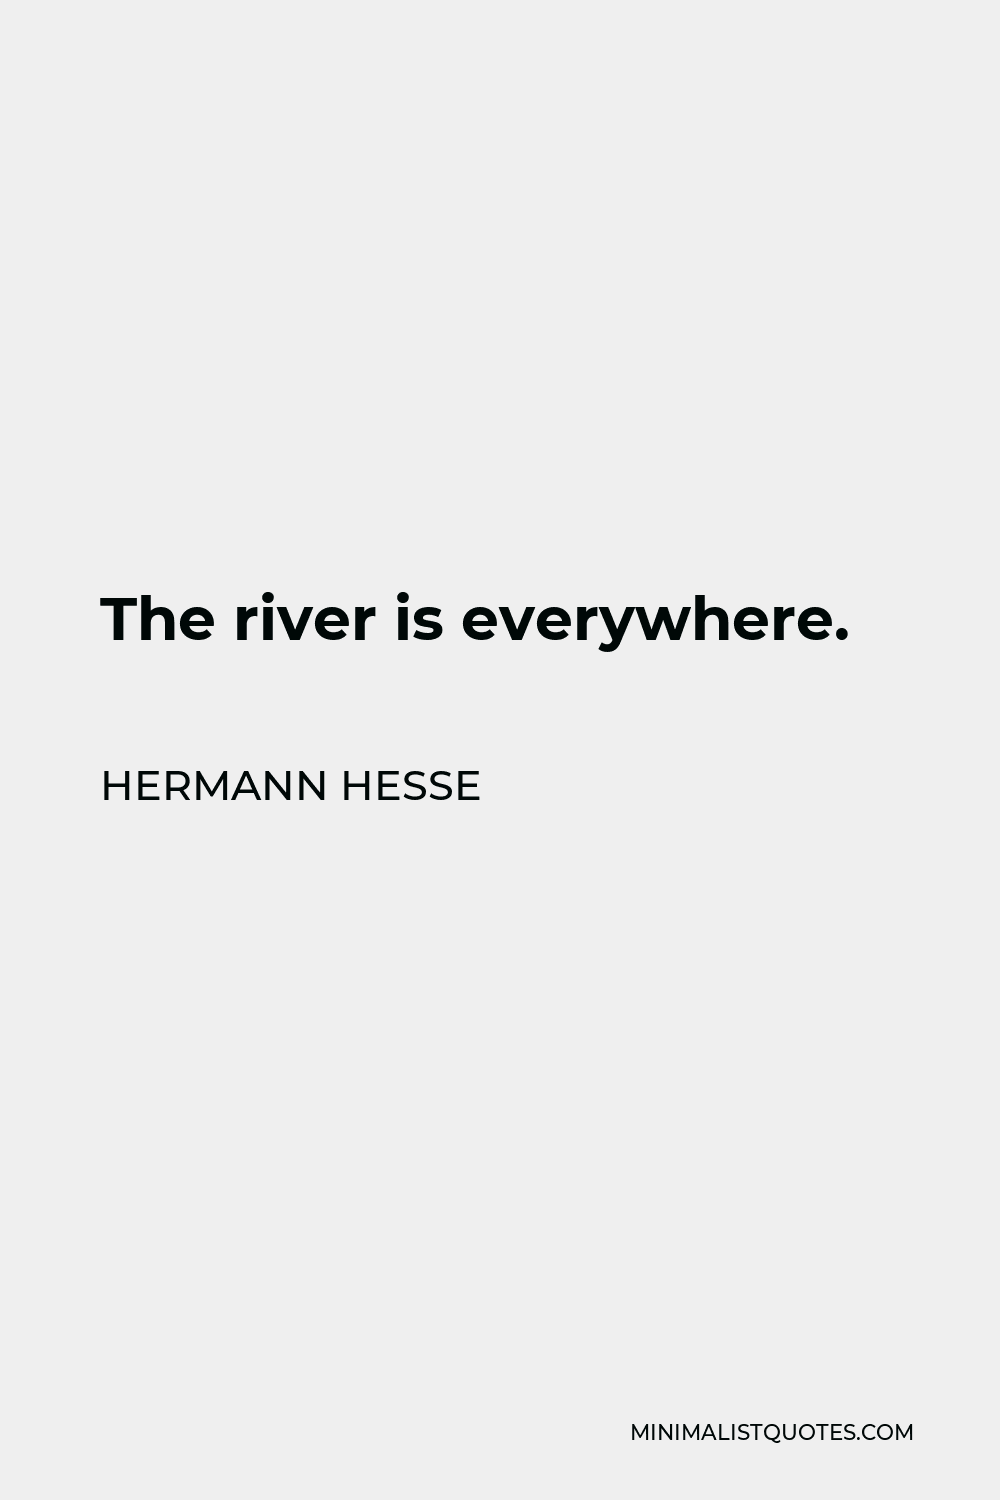 Hermann Hesse Quote - The river is everywhere.